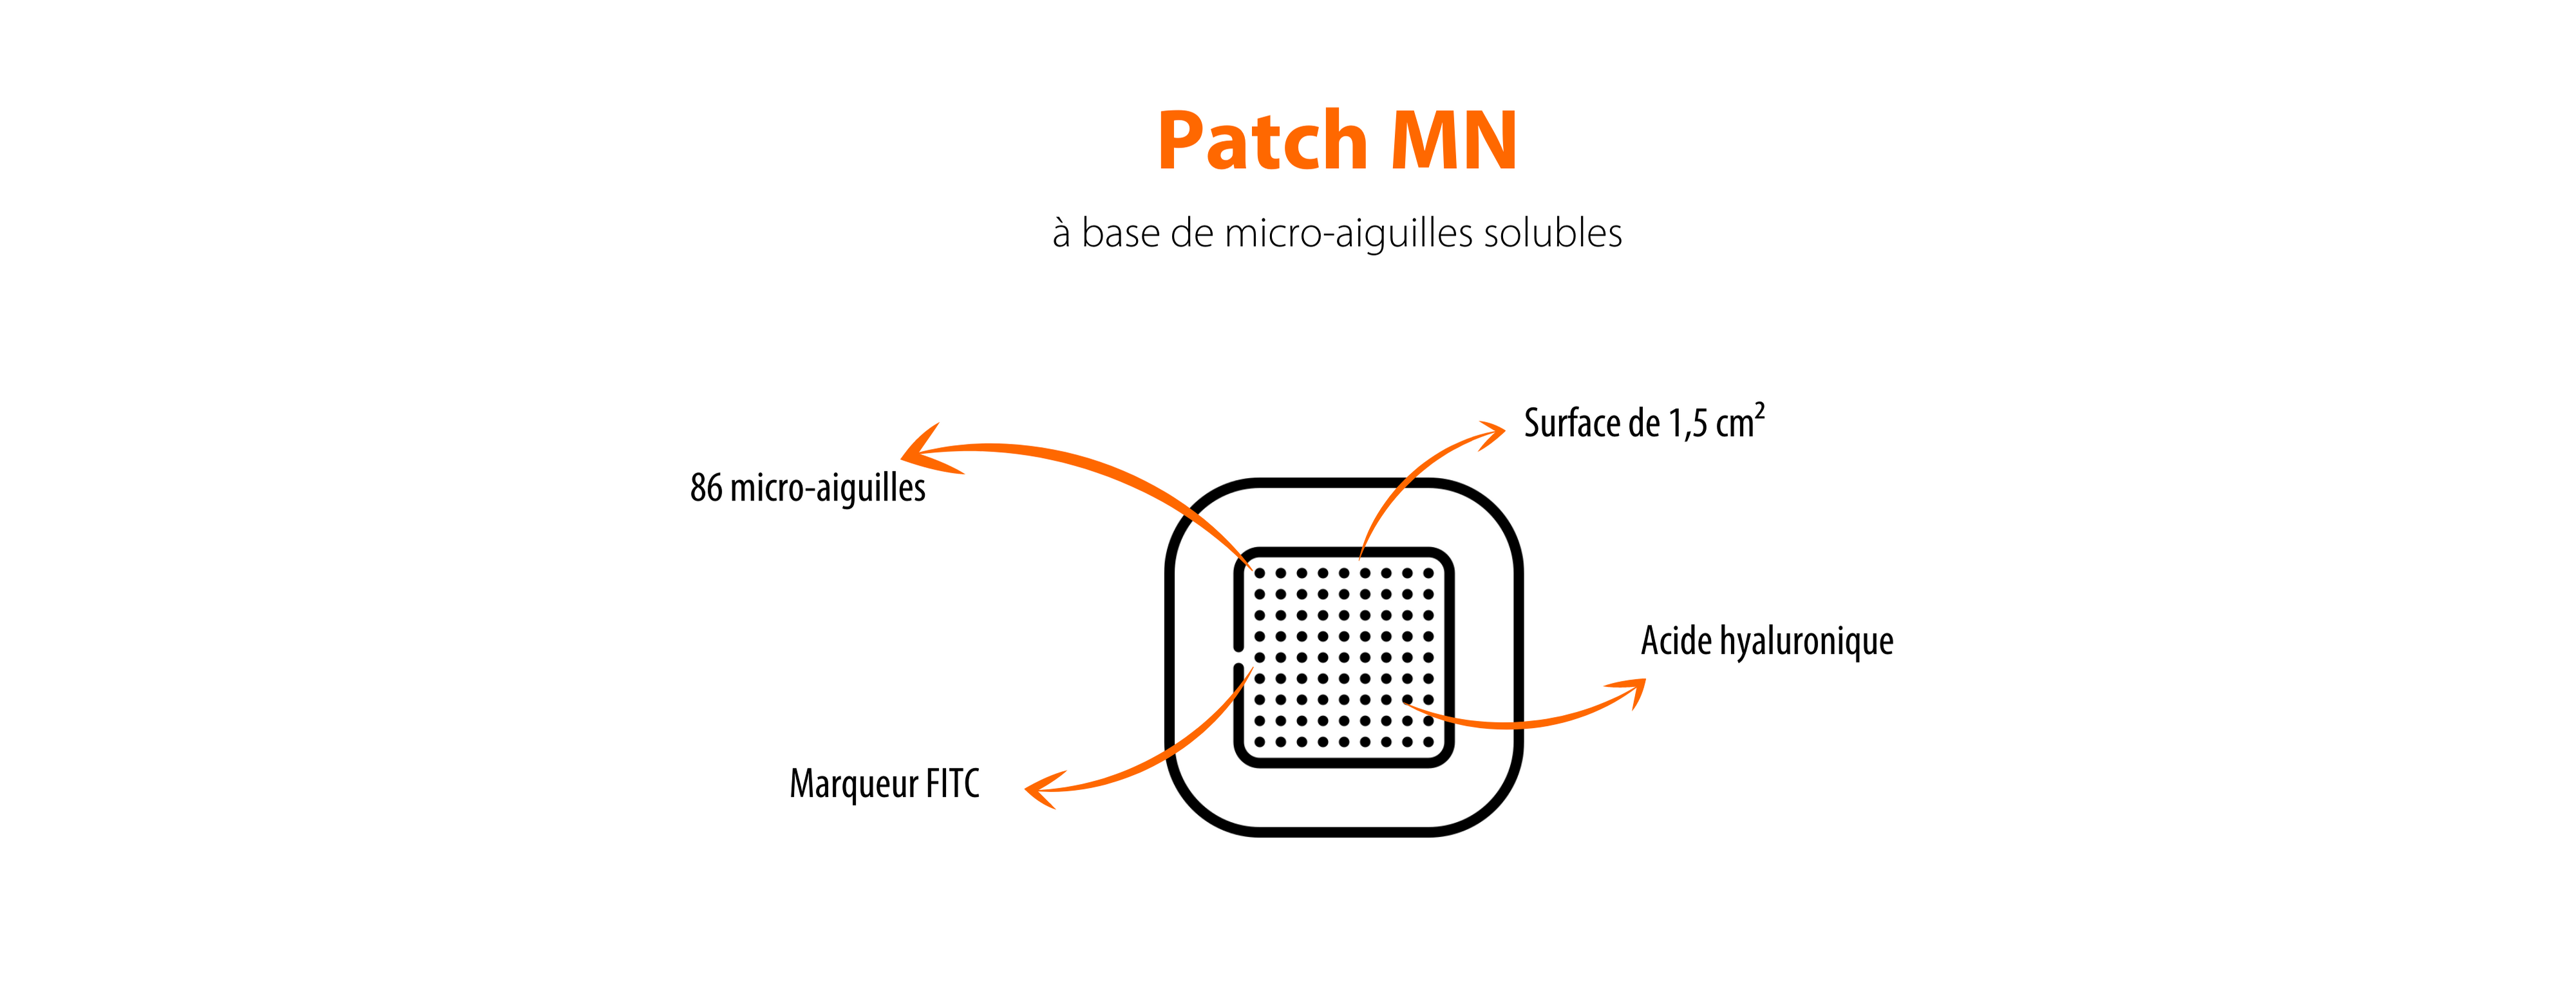 Patch MN